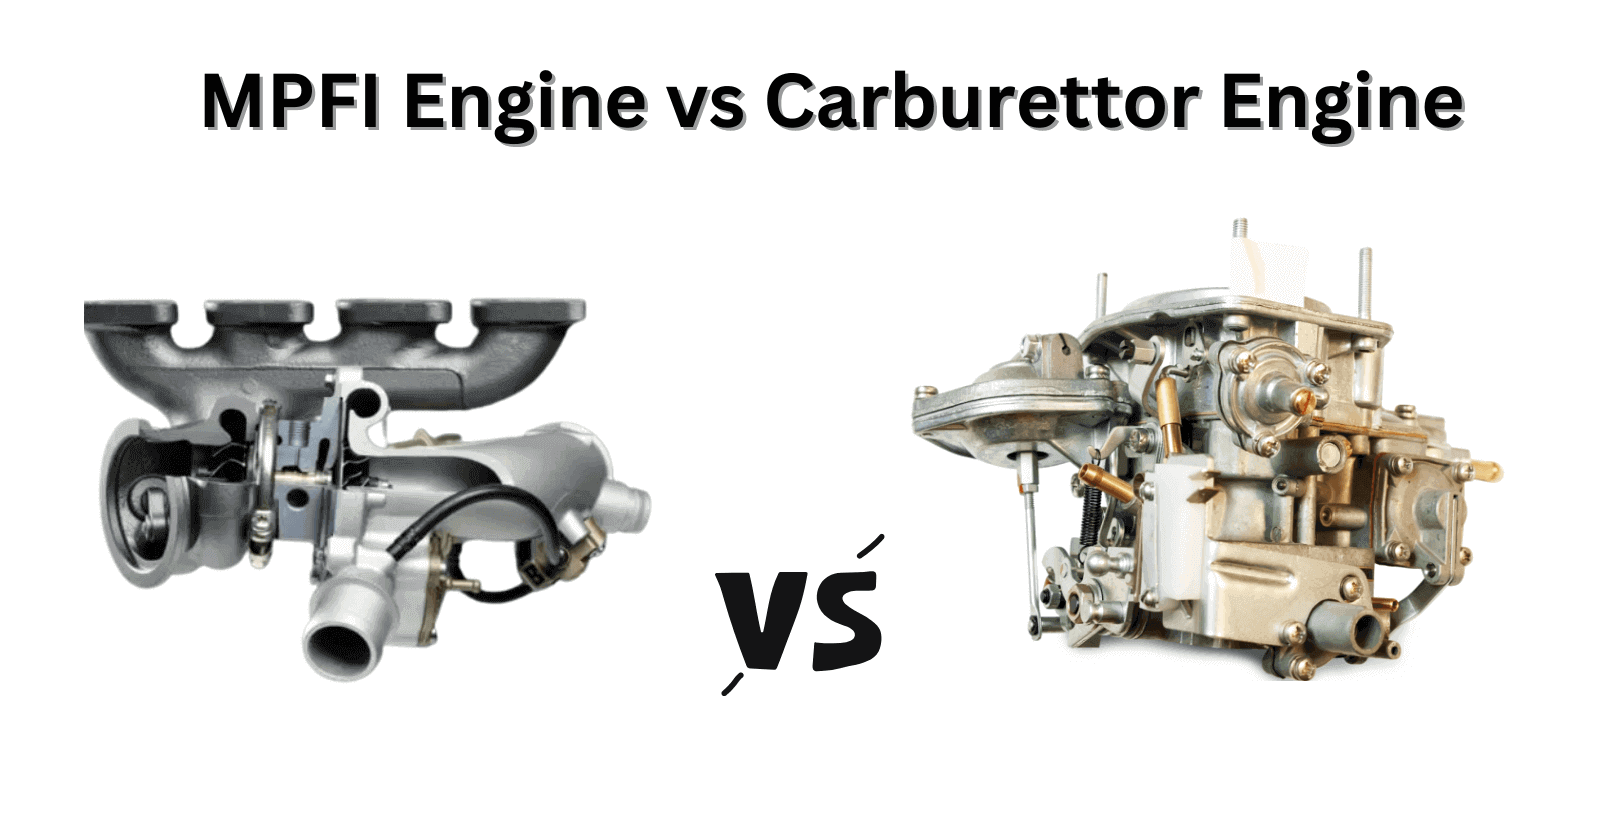 MPFI Engine vs Carburettor Engine: Which is Better?